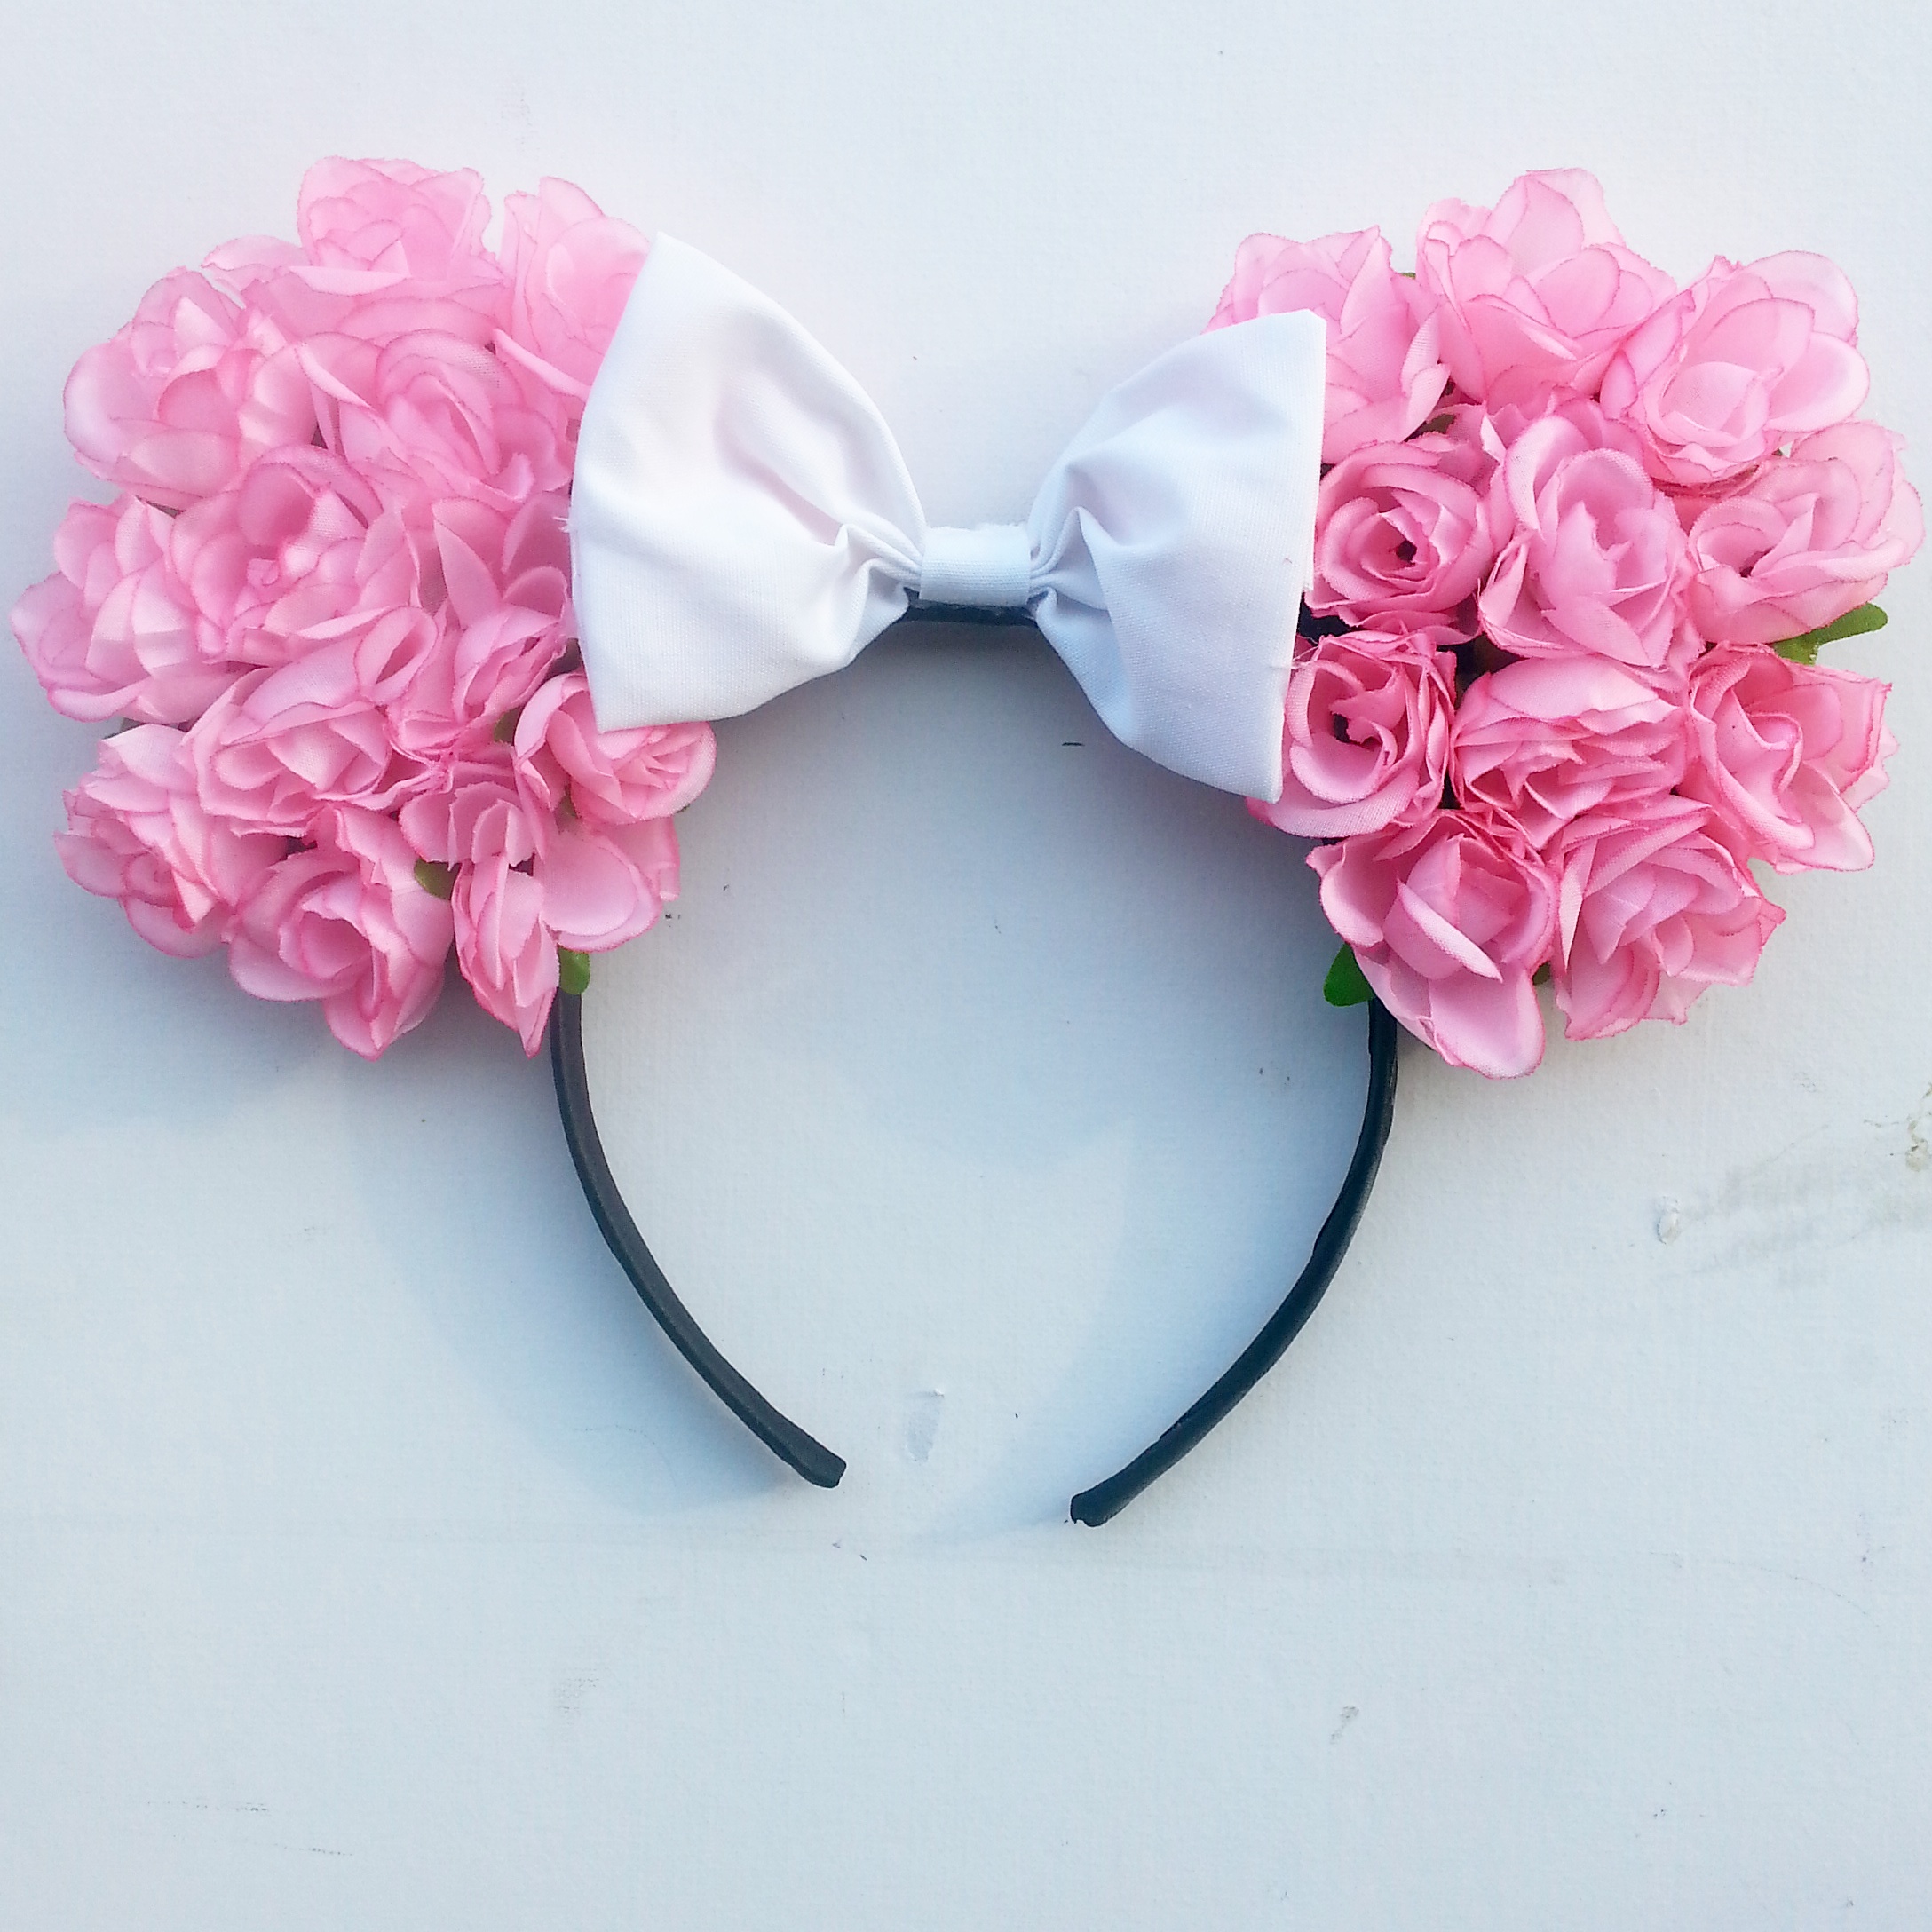 These ears are made using pink silk roses and complimented with a ...